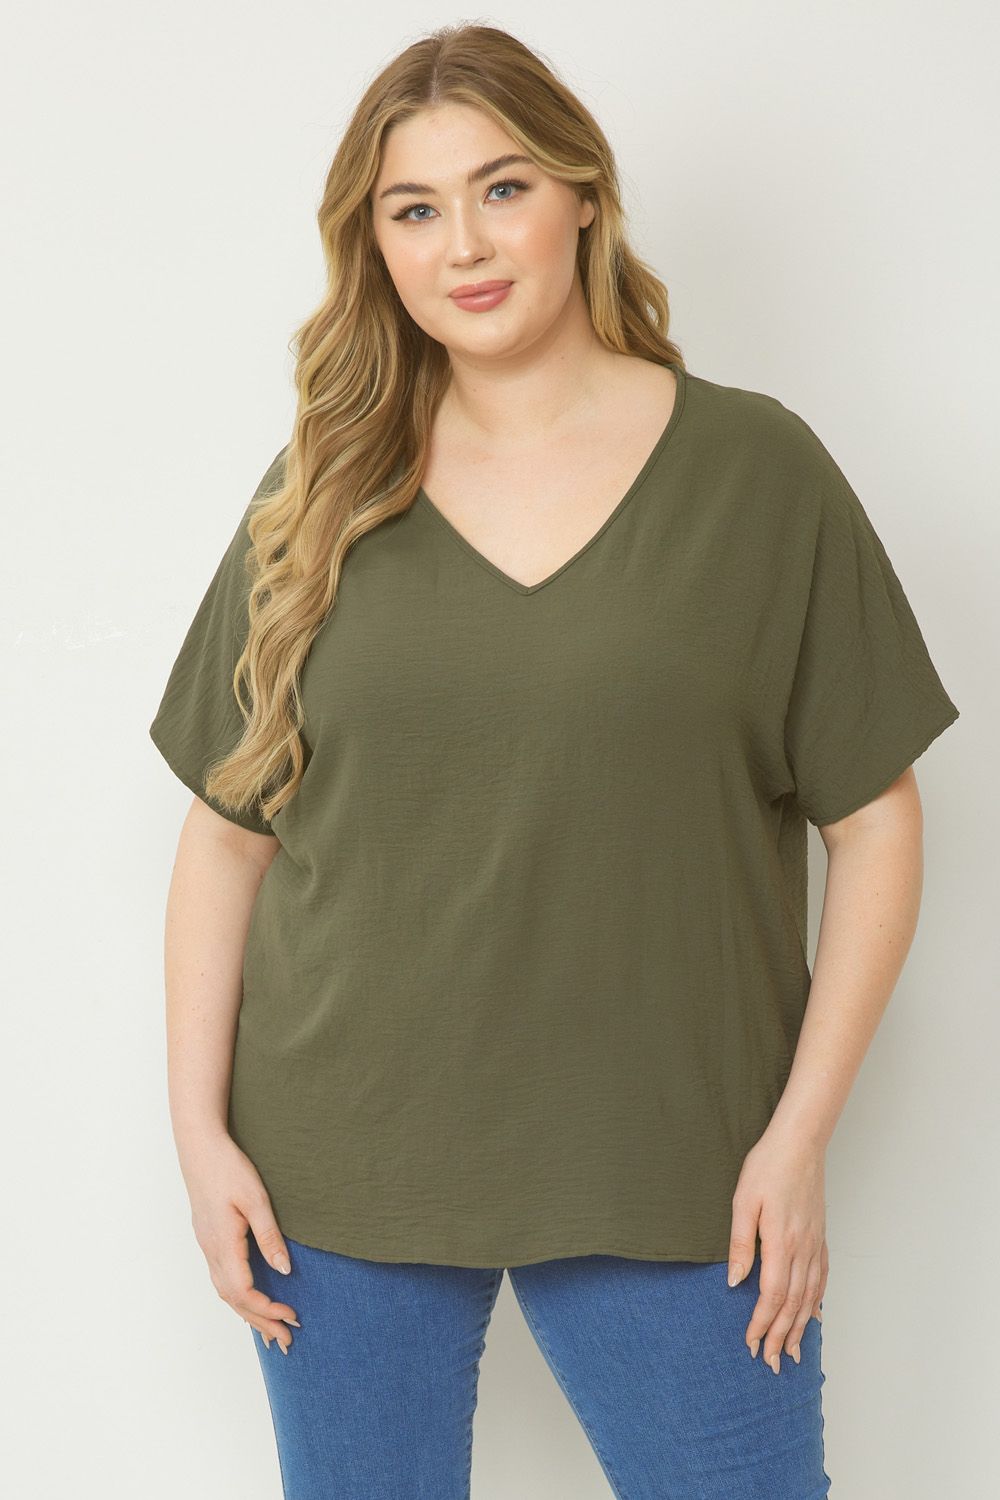 zSALE Curve Thea Essential V-Neck Short Sleeve Woven Blouse - Olive Green